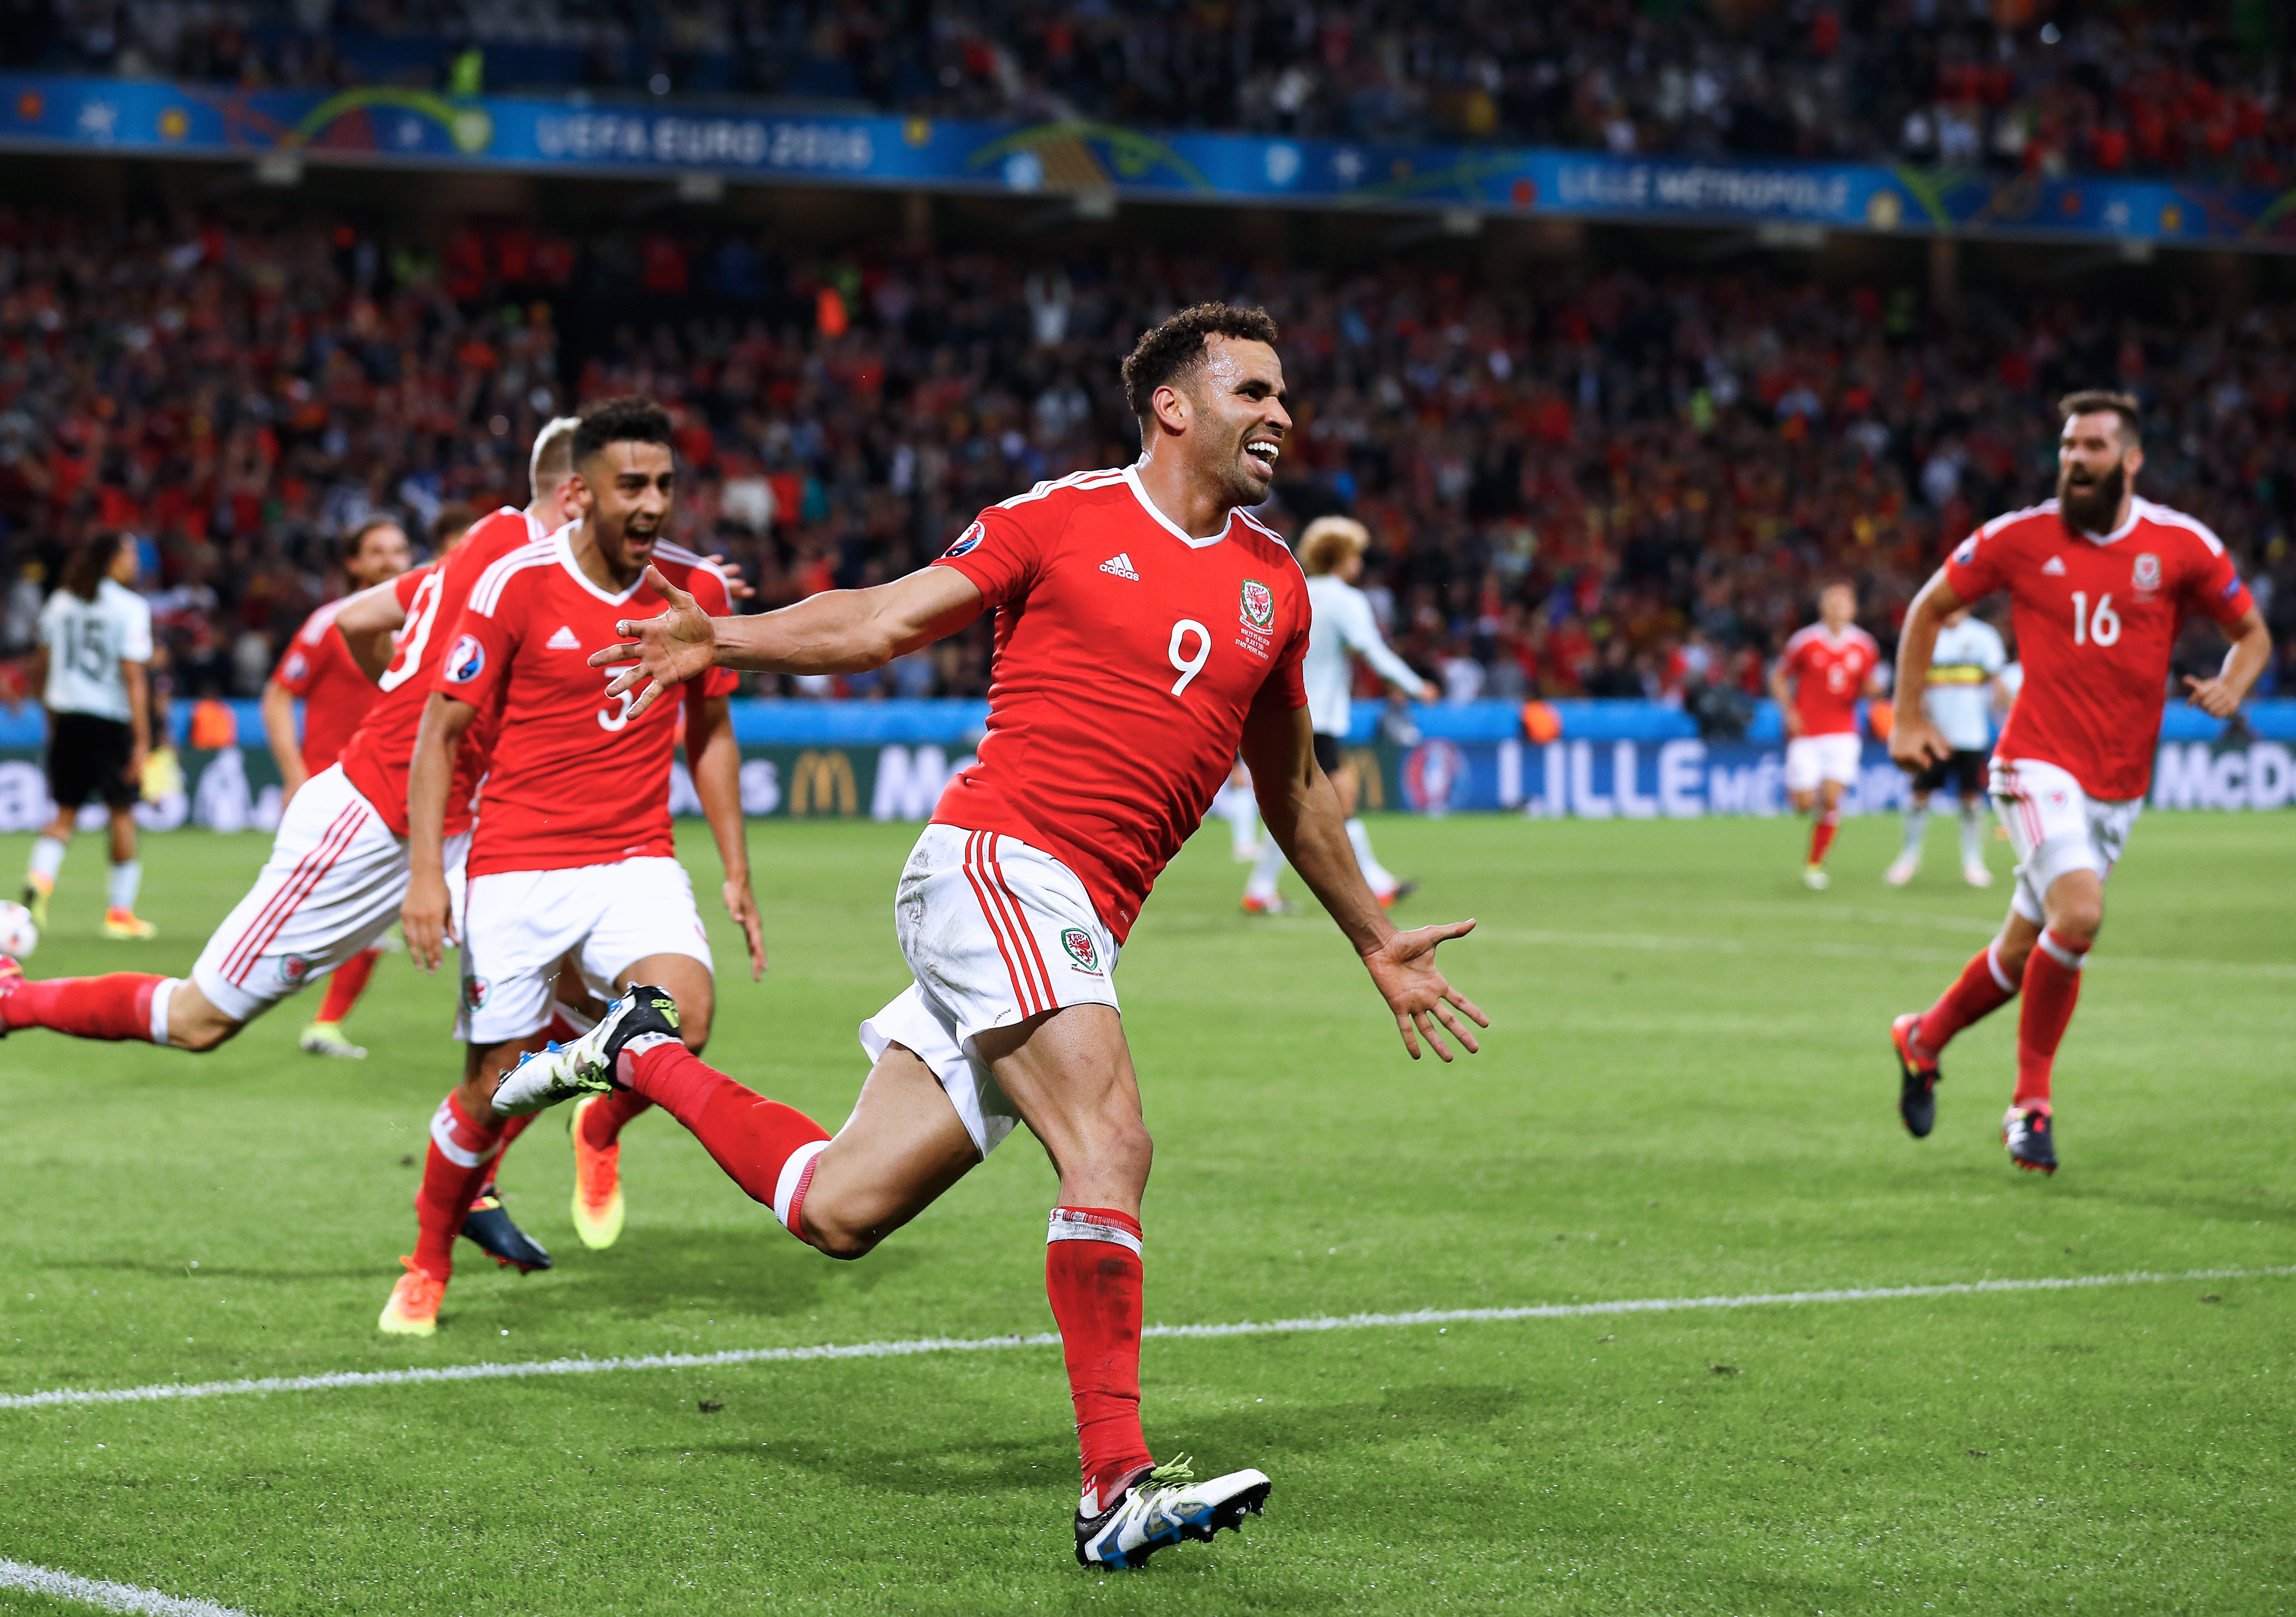 How an incredible Euro 2016 run redefined the boundaries for the Welsh national team